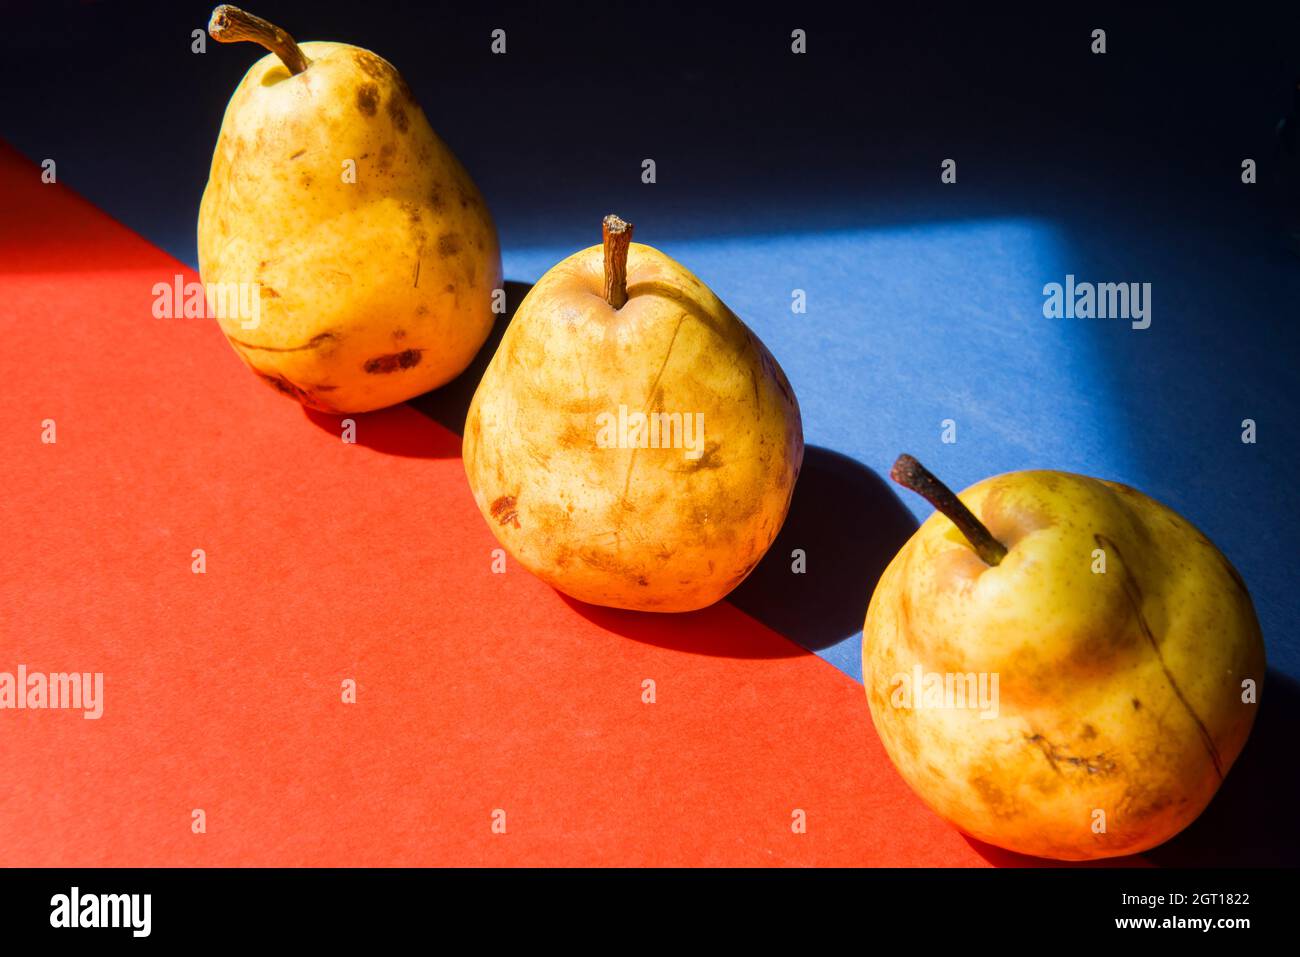 Organic Yellow Pear On The Table Stock Photo